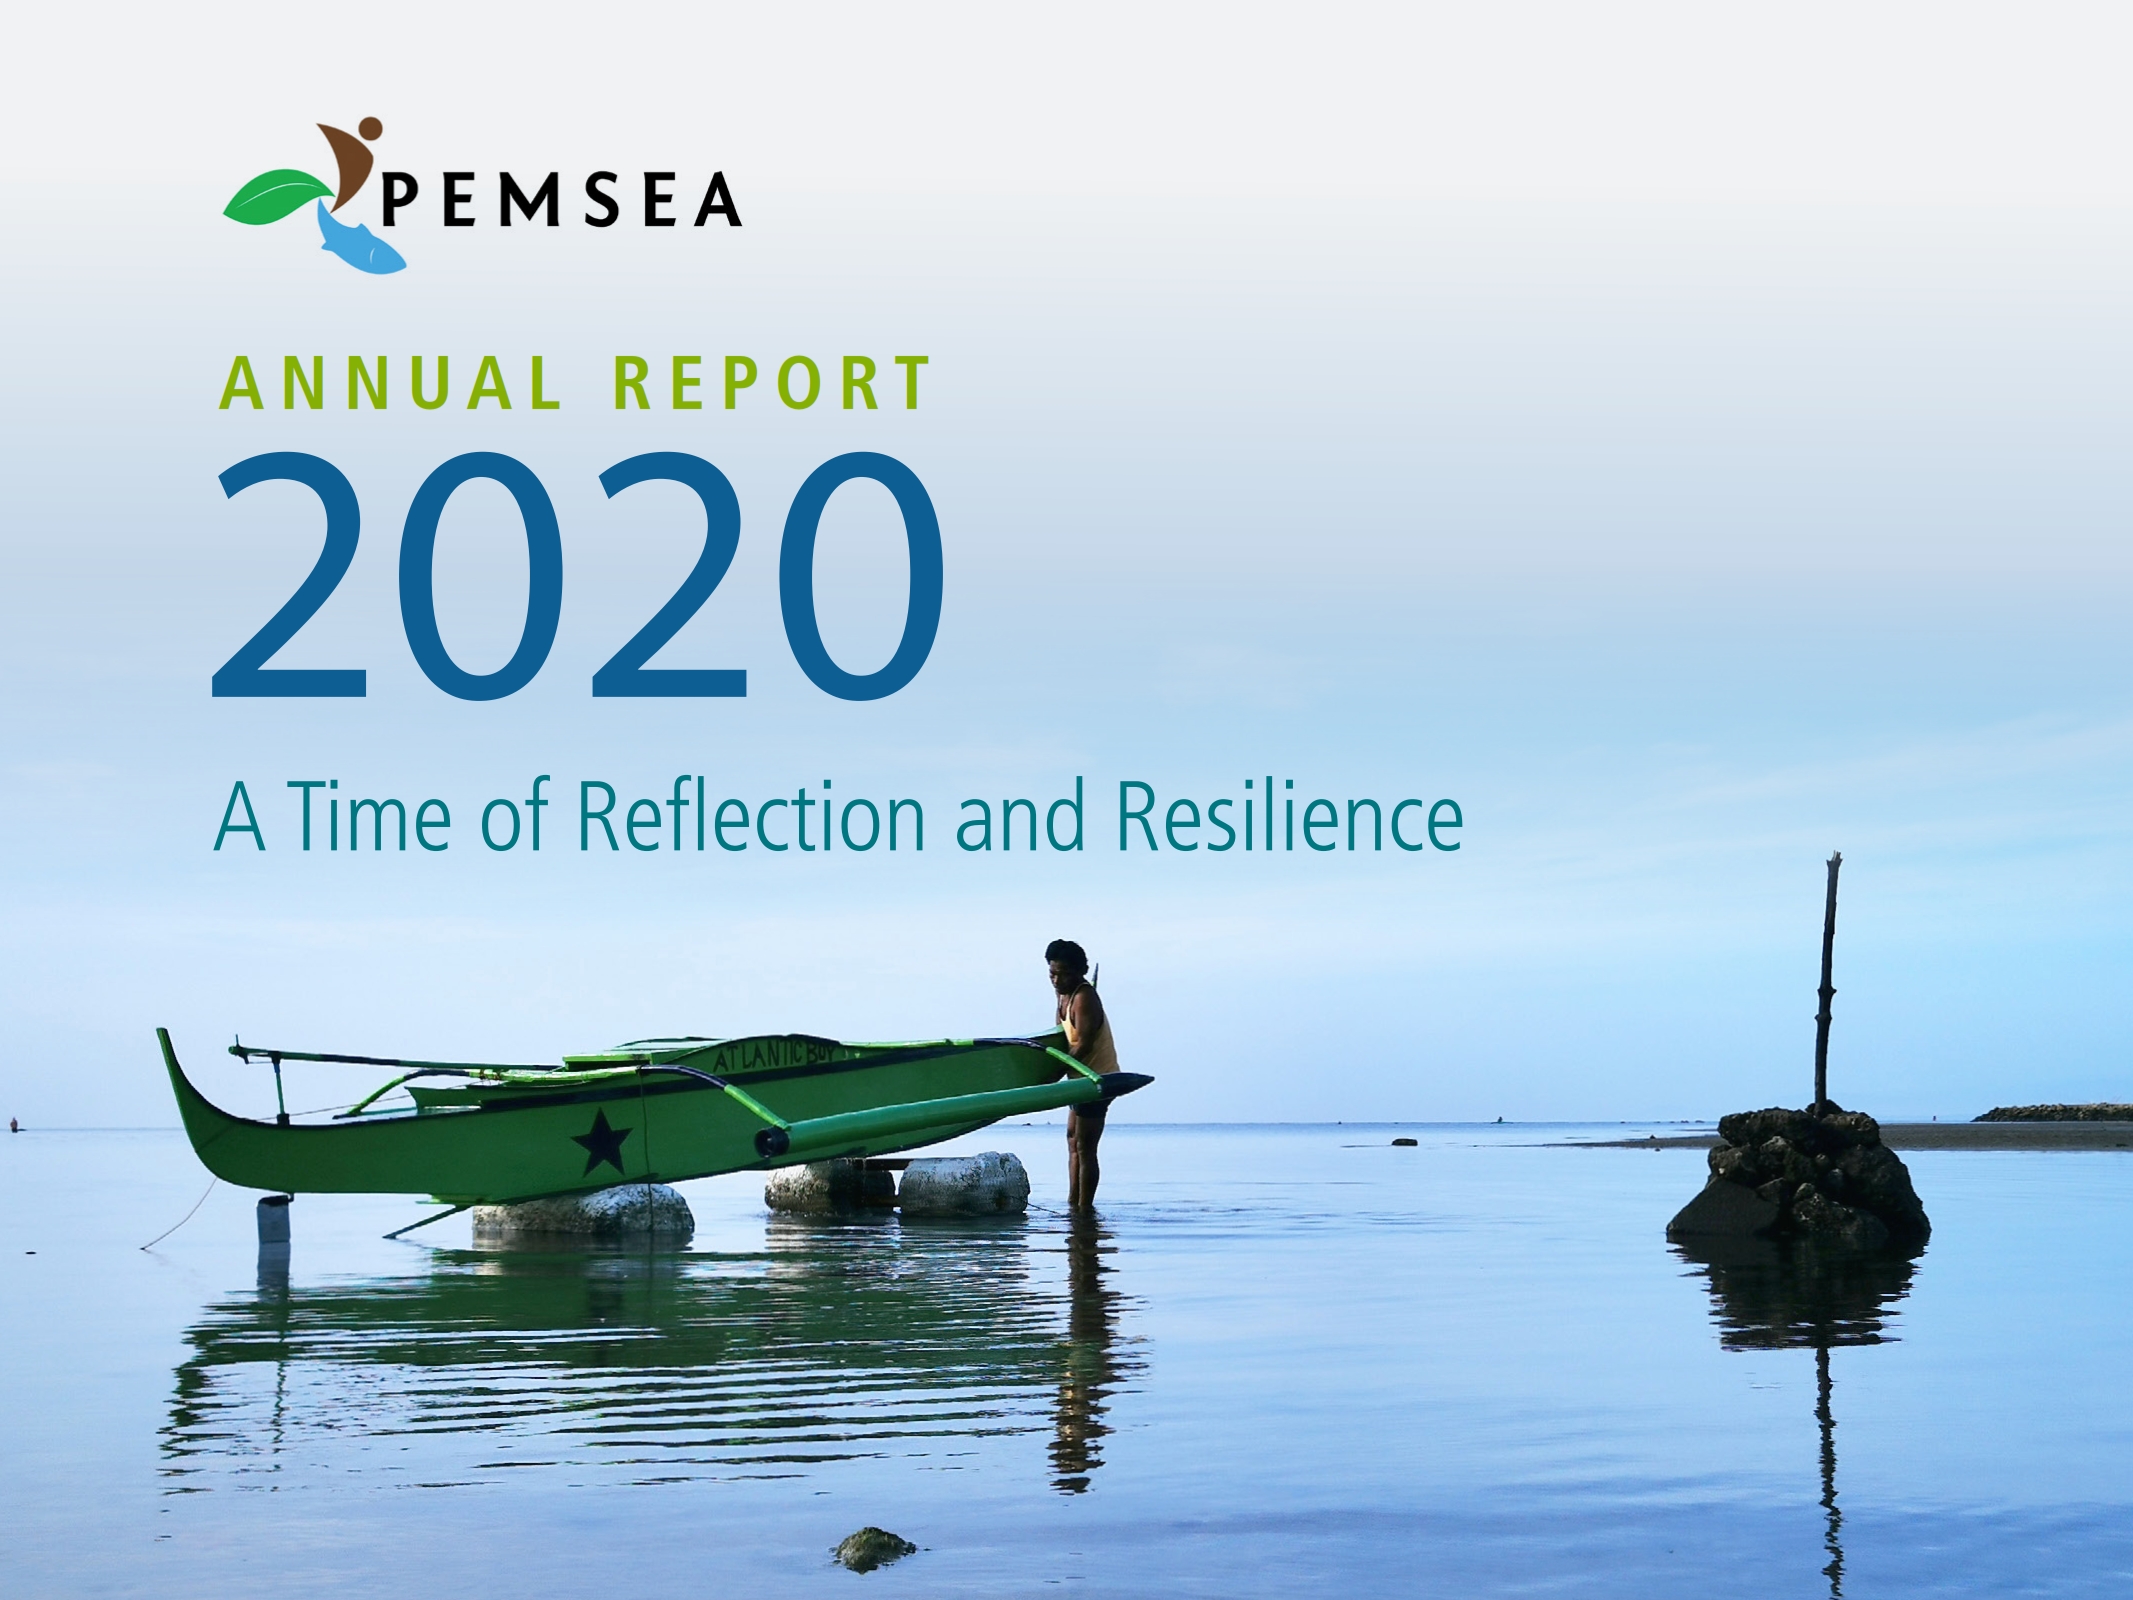 PEMSEA Annual Report 2020: A Time of Reflection and Resilience